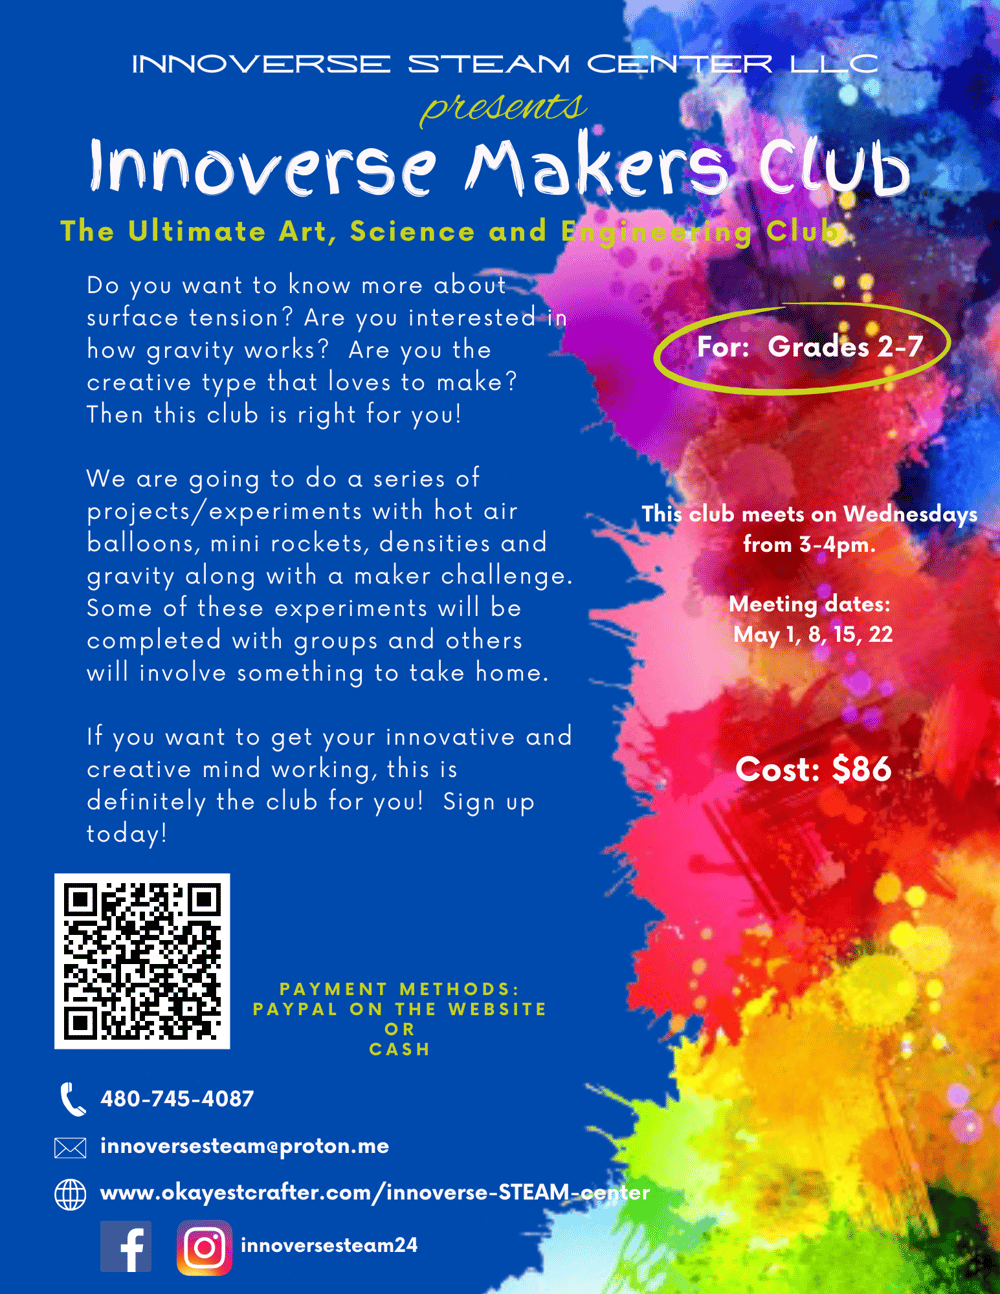 Innoverse Makers Club STCS